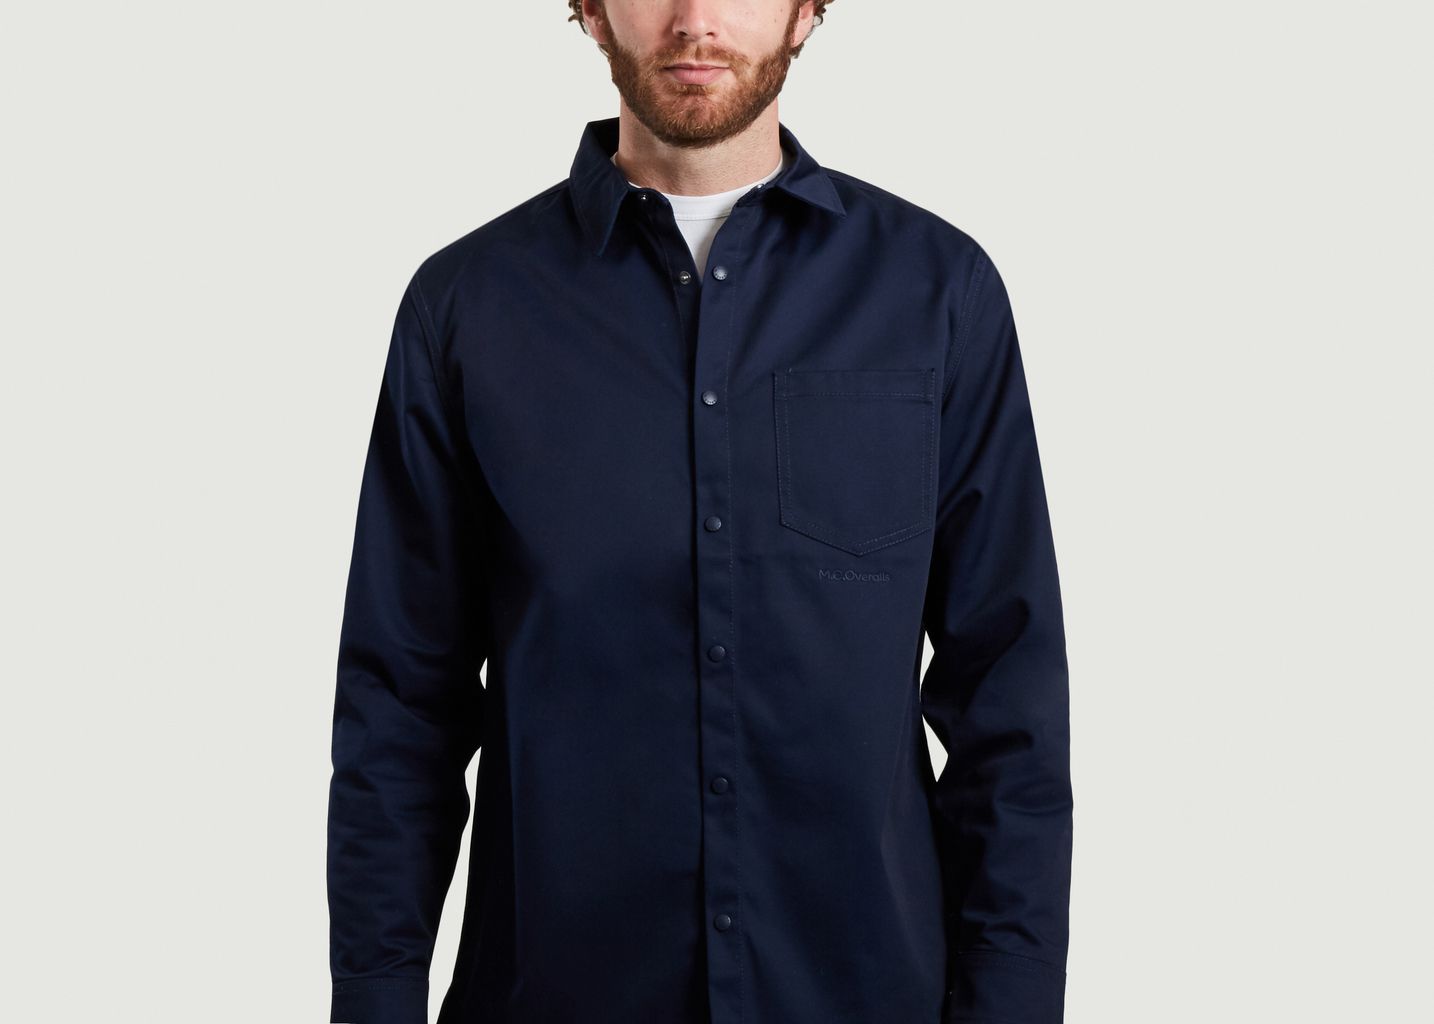 Oversize shirt with pocket - M.C. Overalls